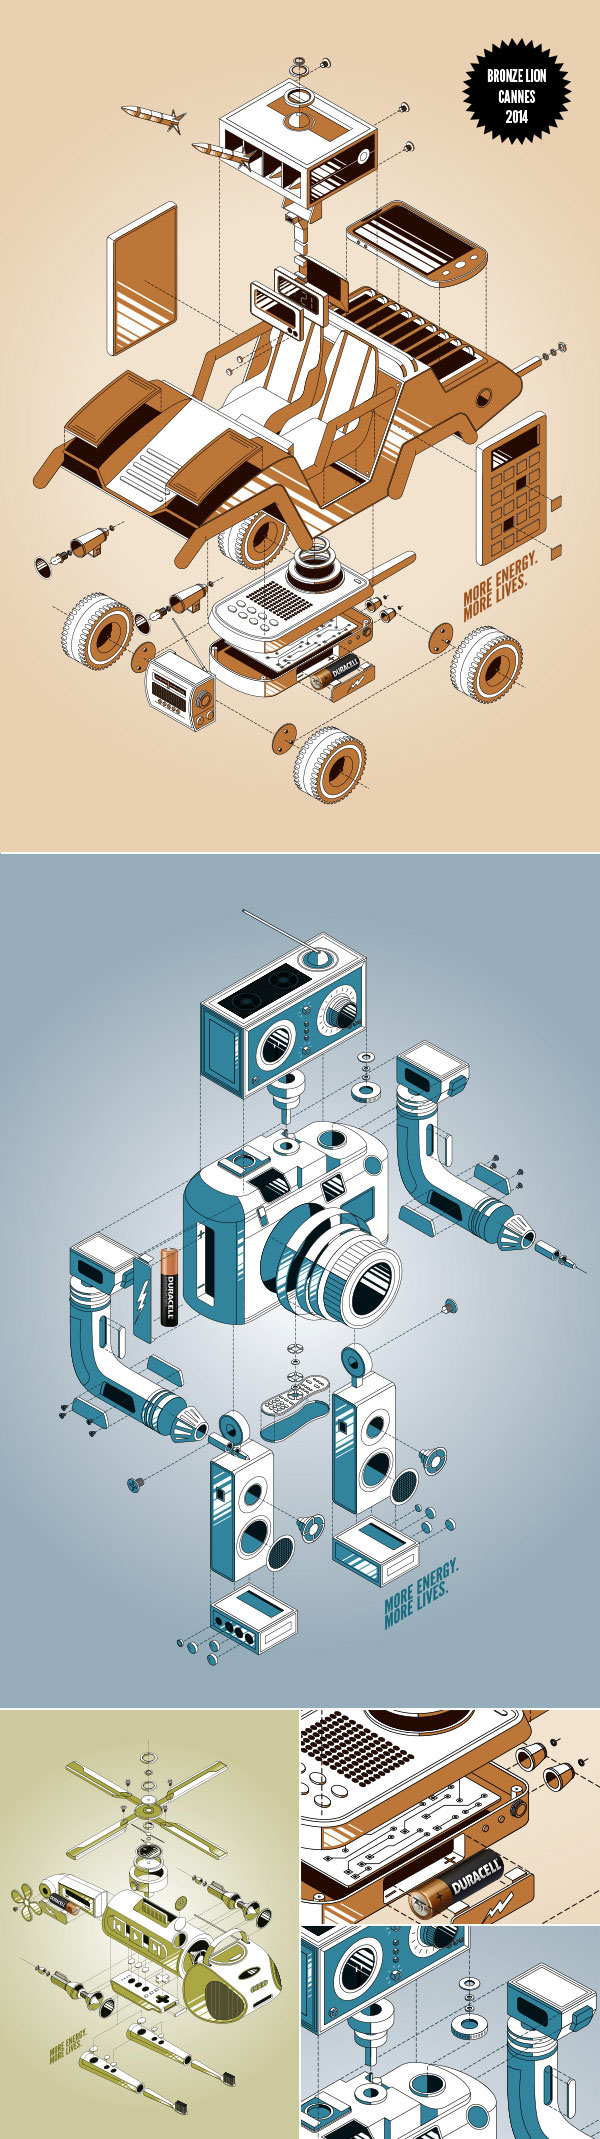 Isometric illustrations by blindSALIDA for the award winning (Cannes Lion) campaign for Duracell.